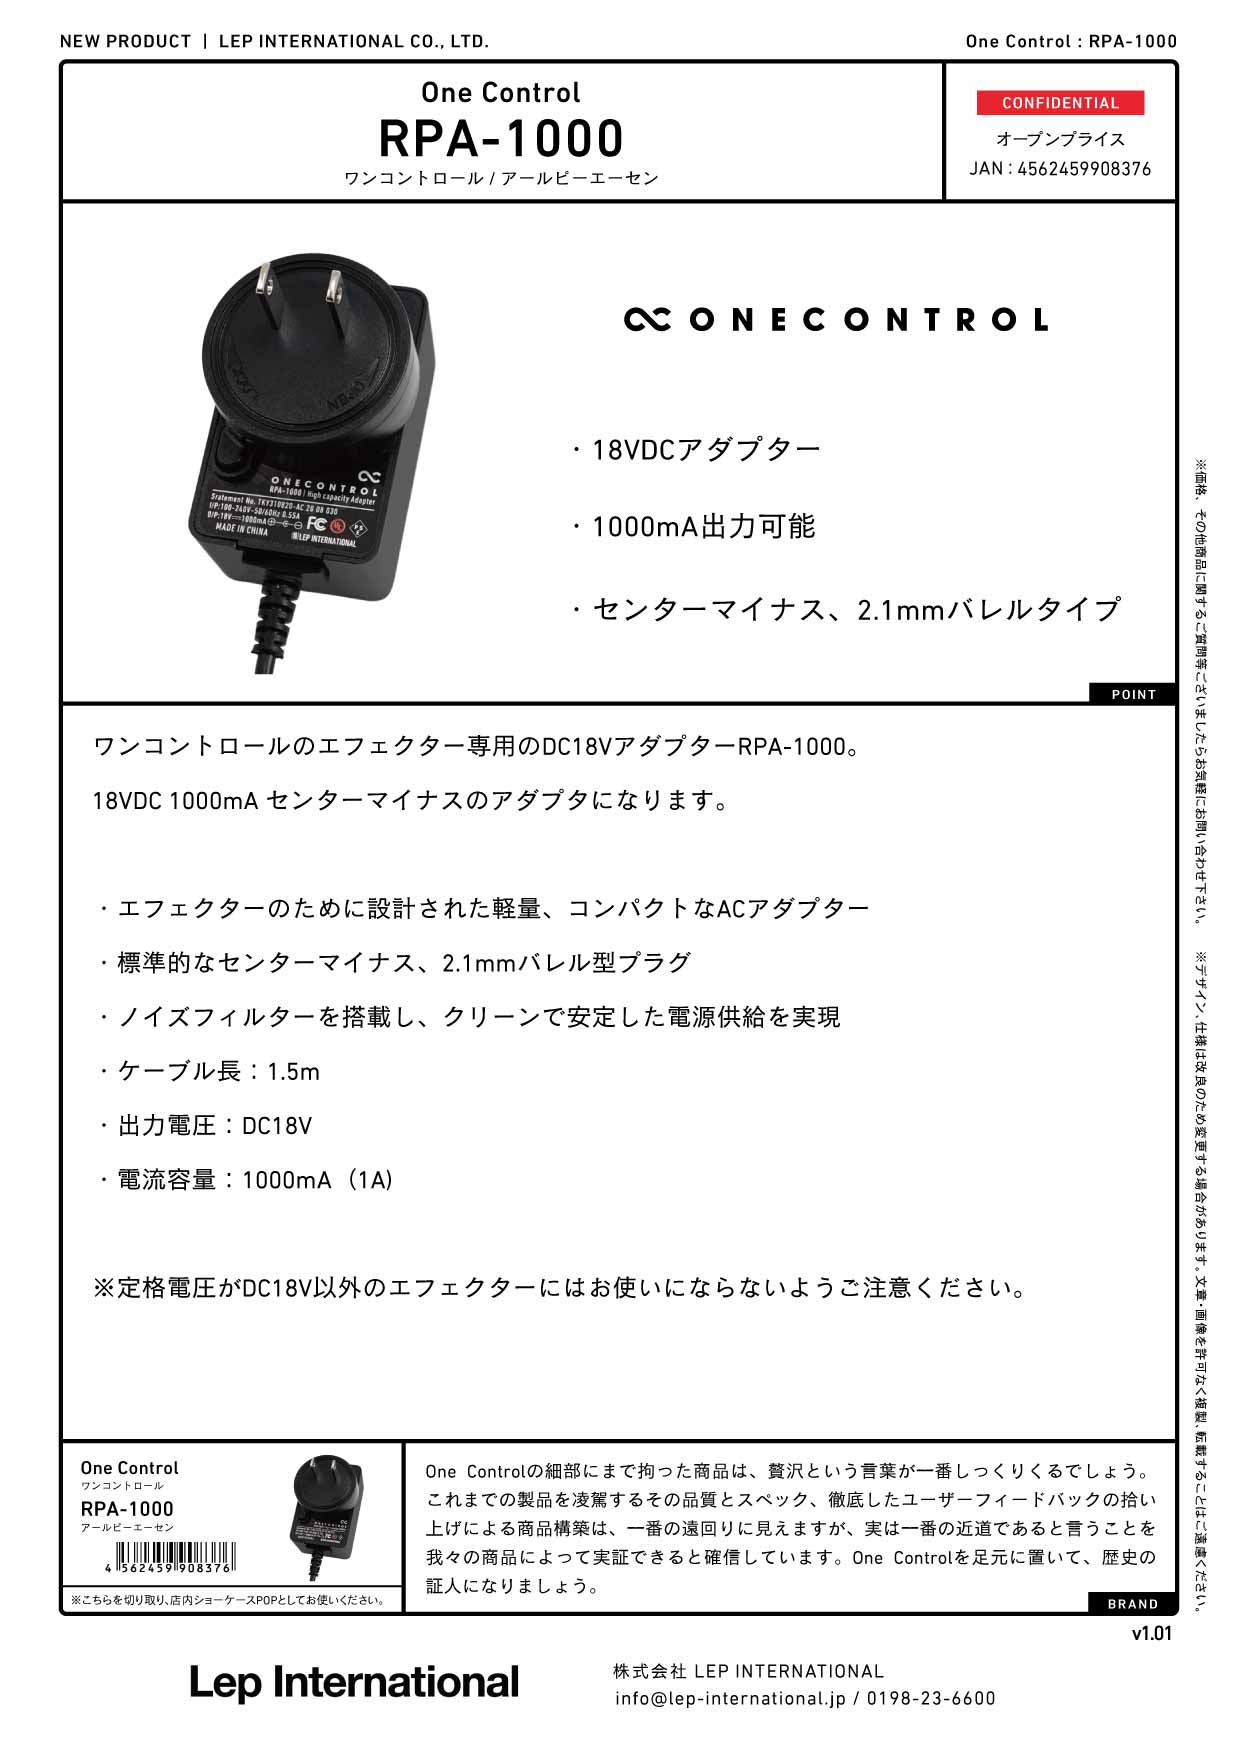 One Control / RPA-1000